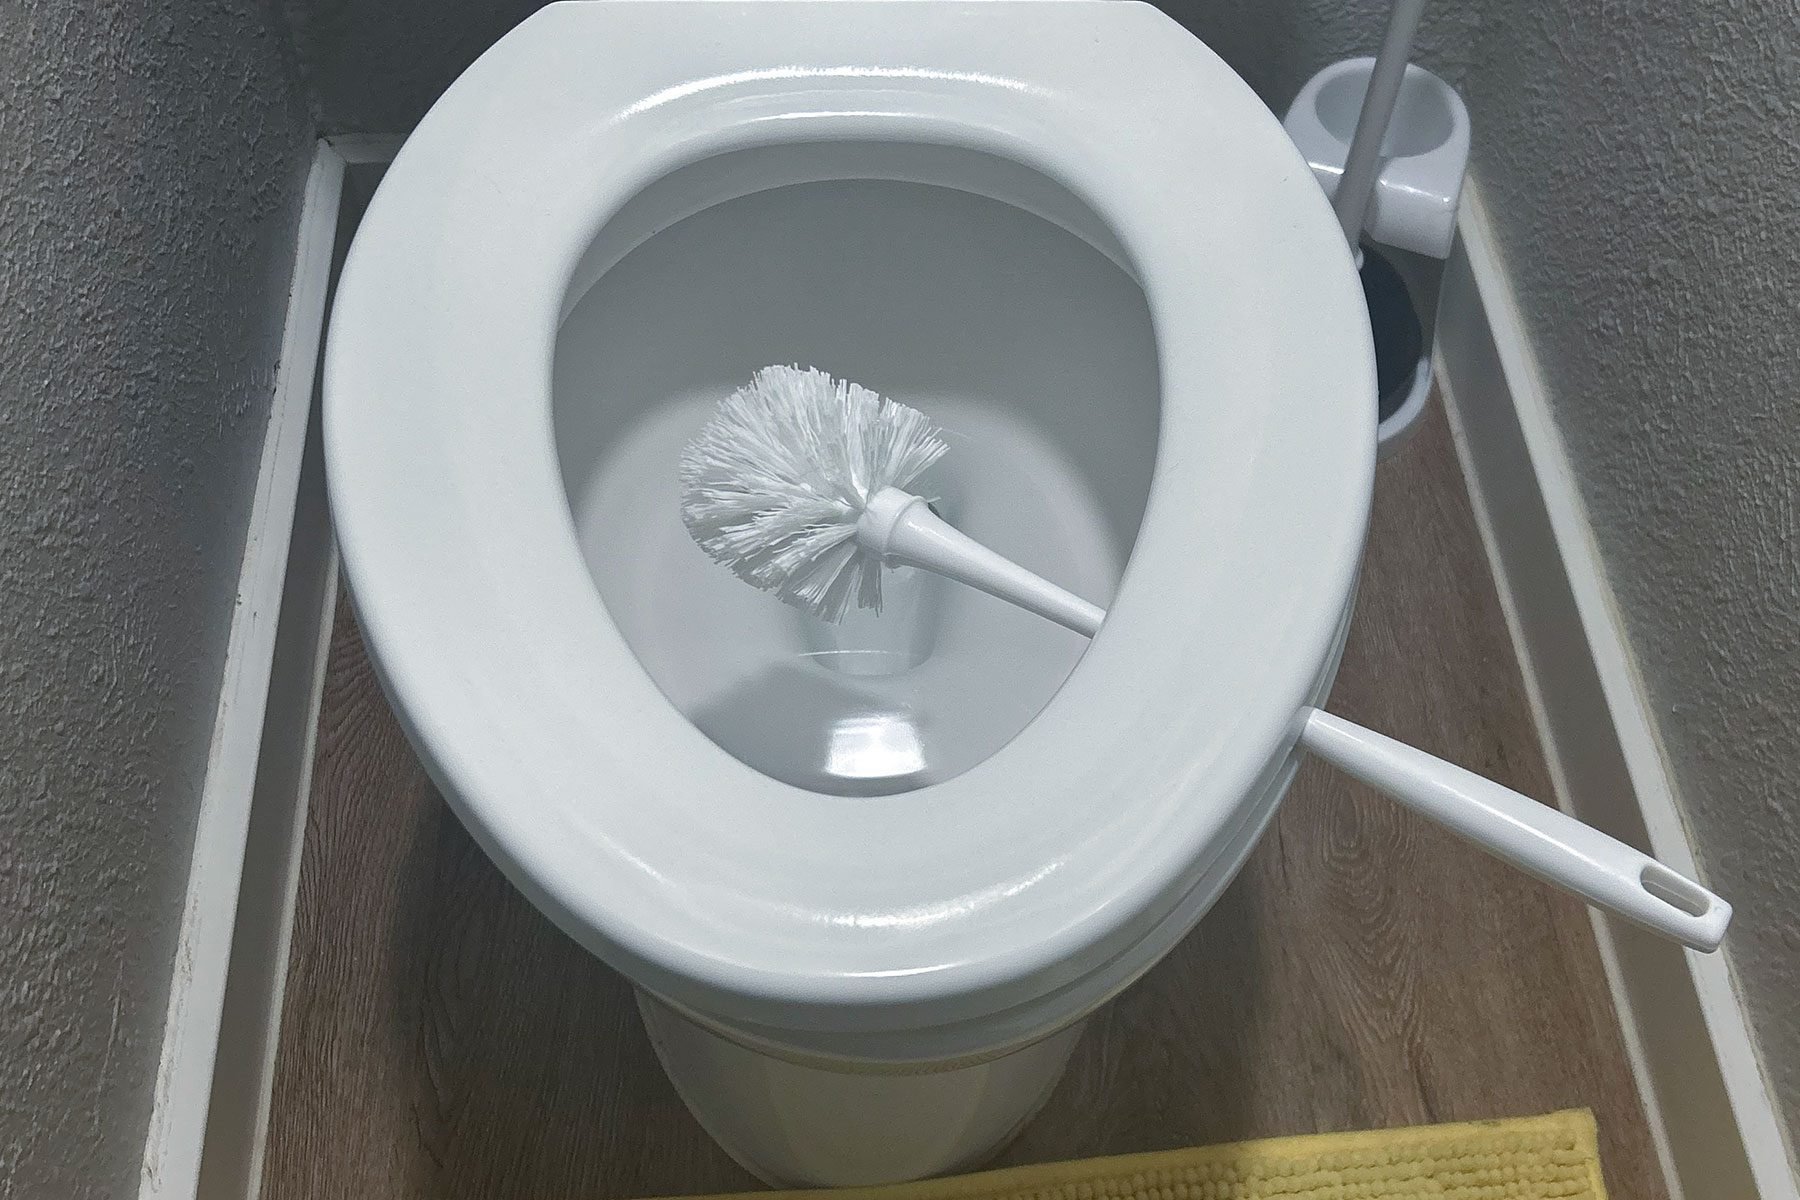 How To Clean a Toilet Brush and Holder